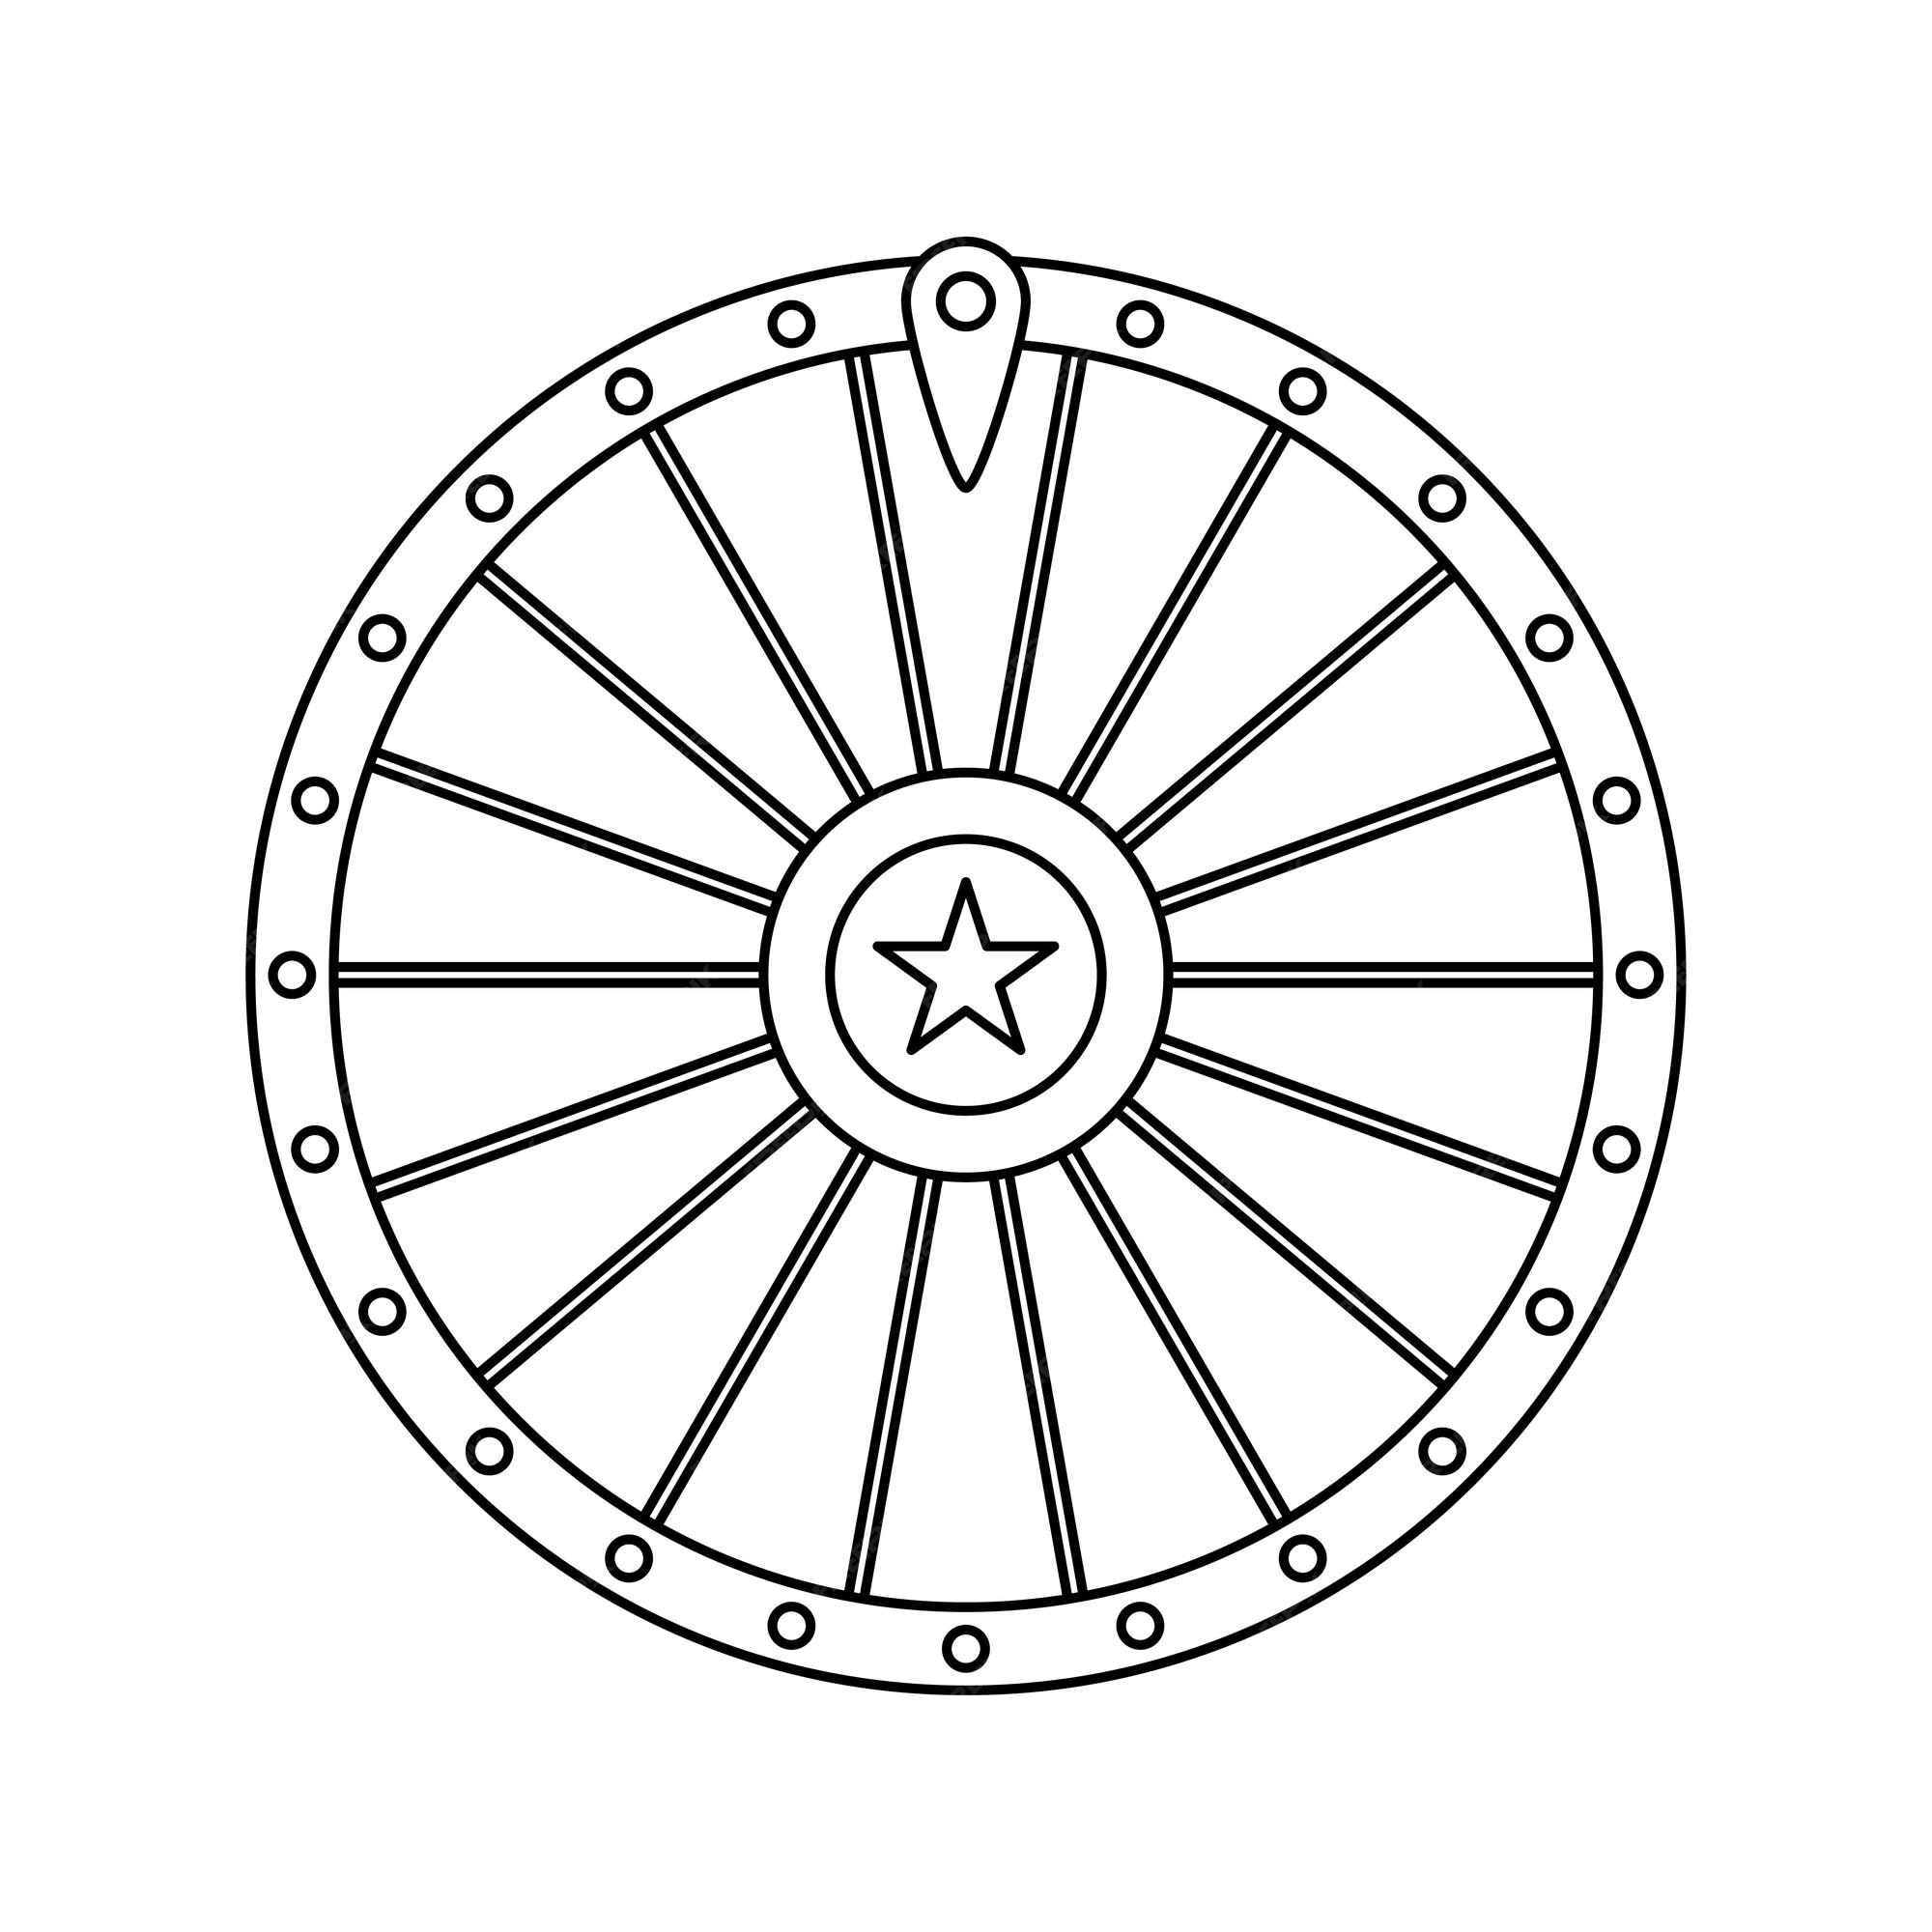 Premium vector coloring page with fortune wheel for kids